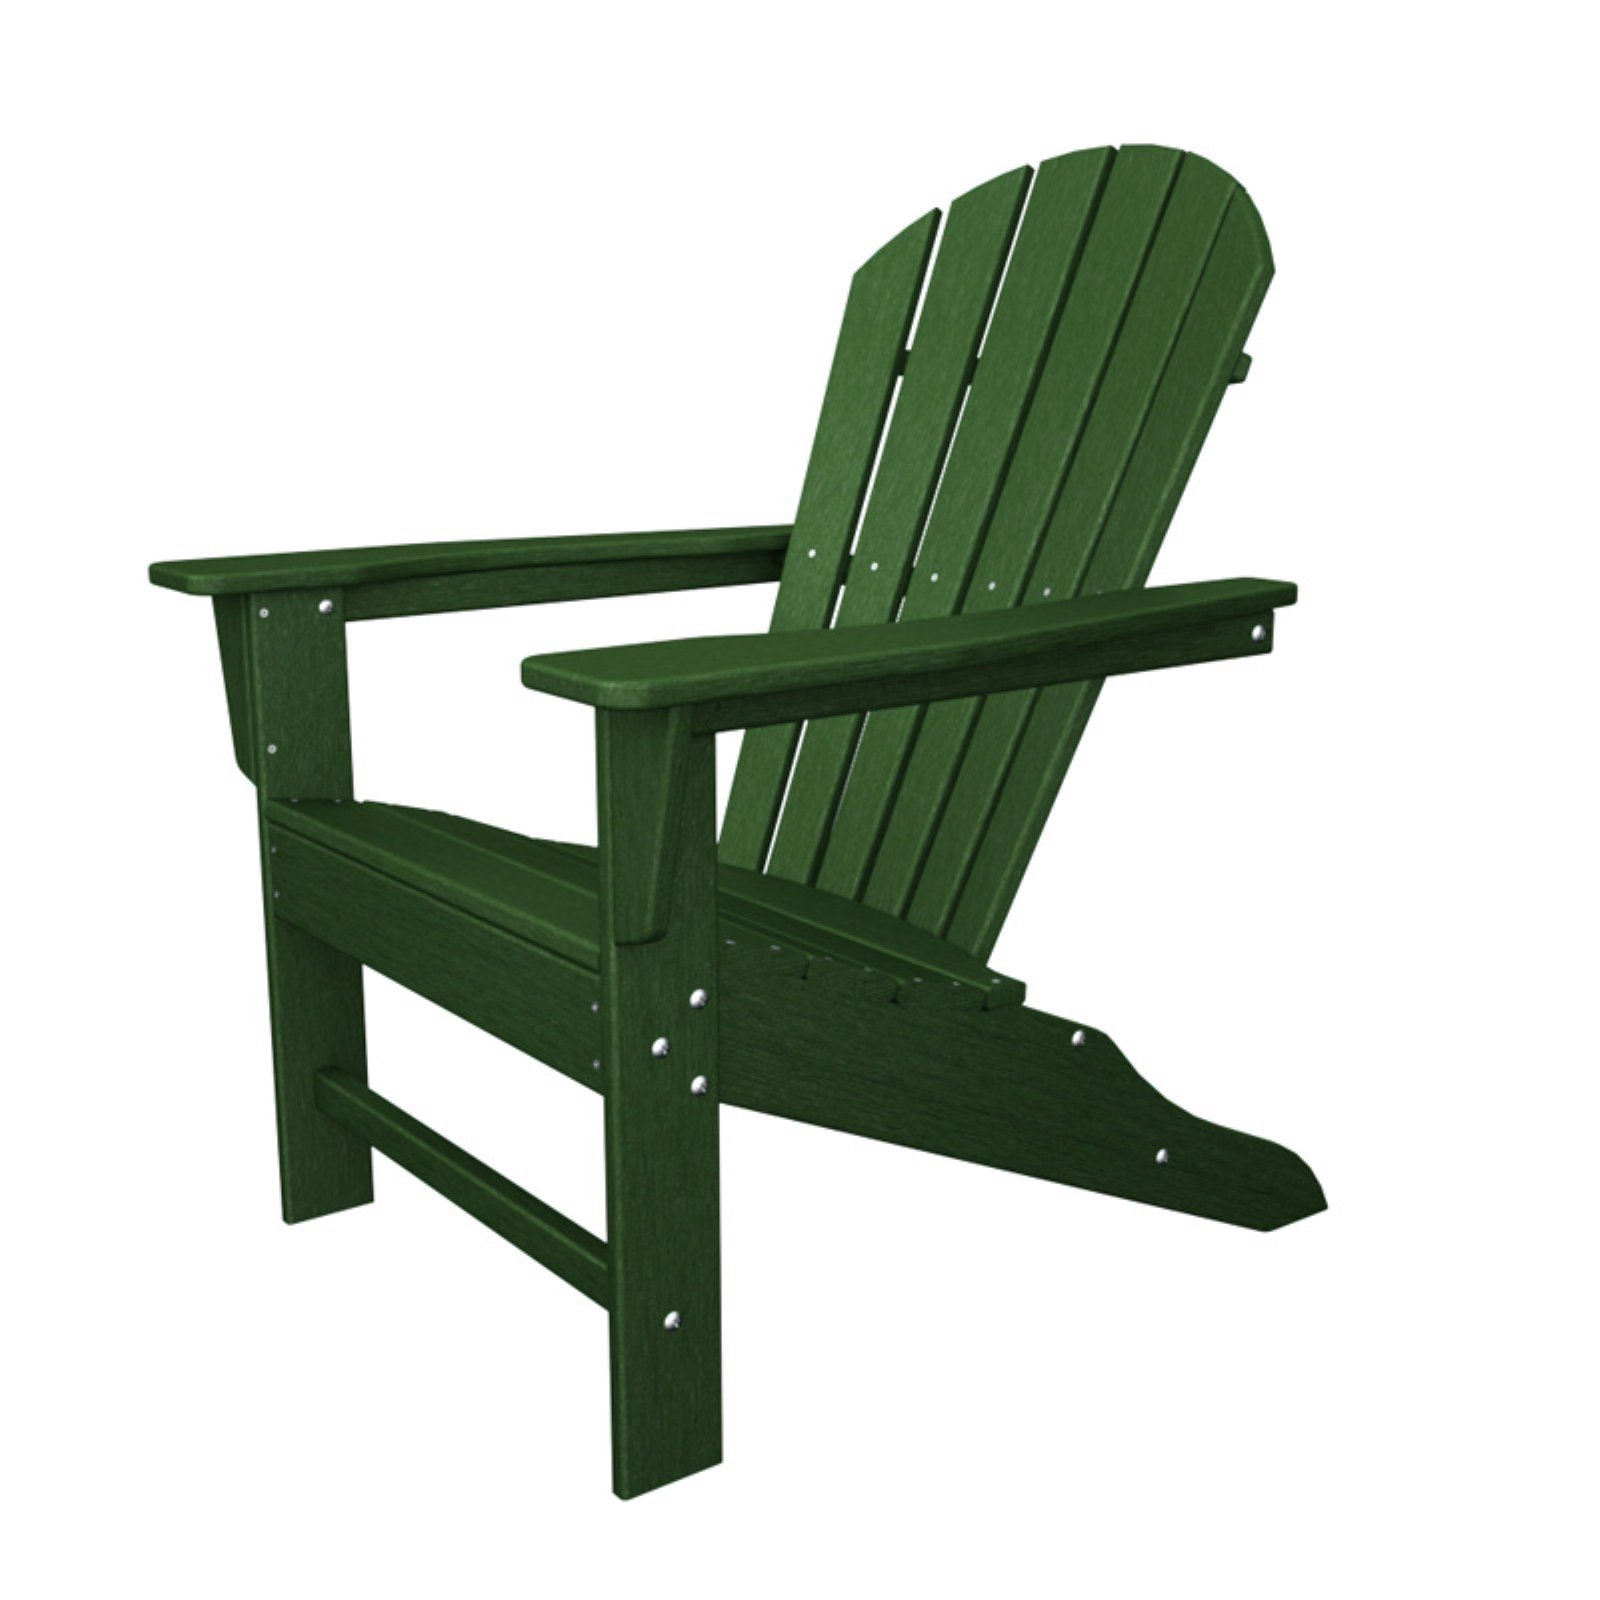 POLYWOOD&reg; South Beach Recycled Plastic Adirondack Chair - image 1 of 11